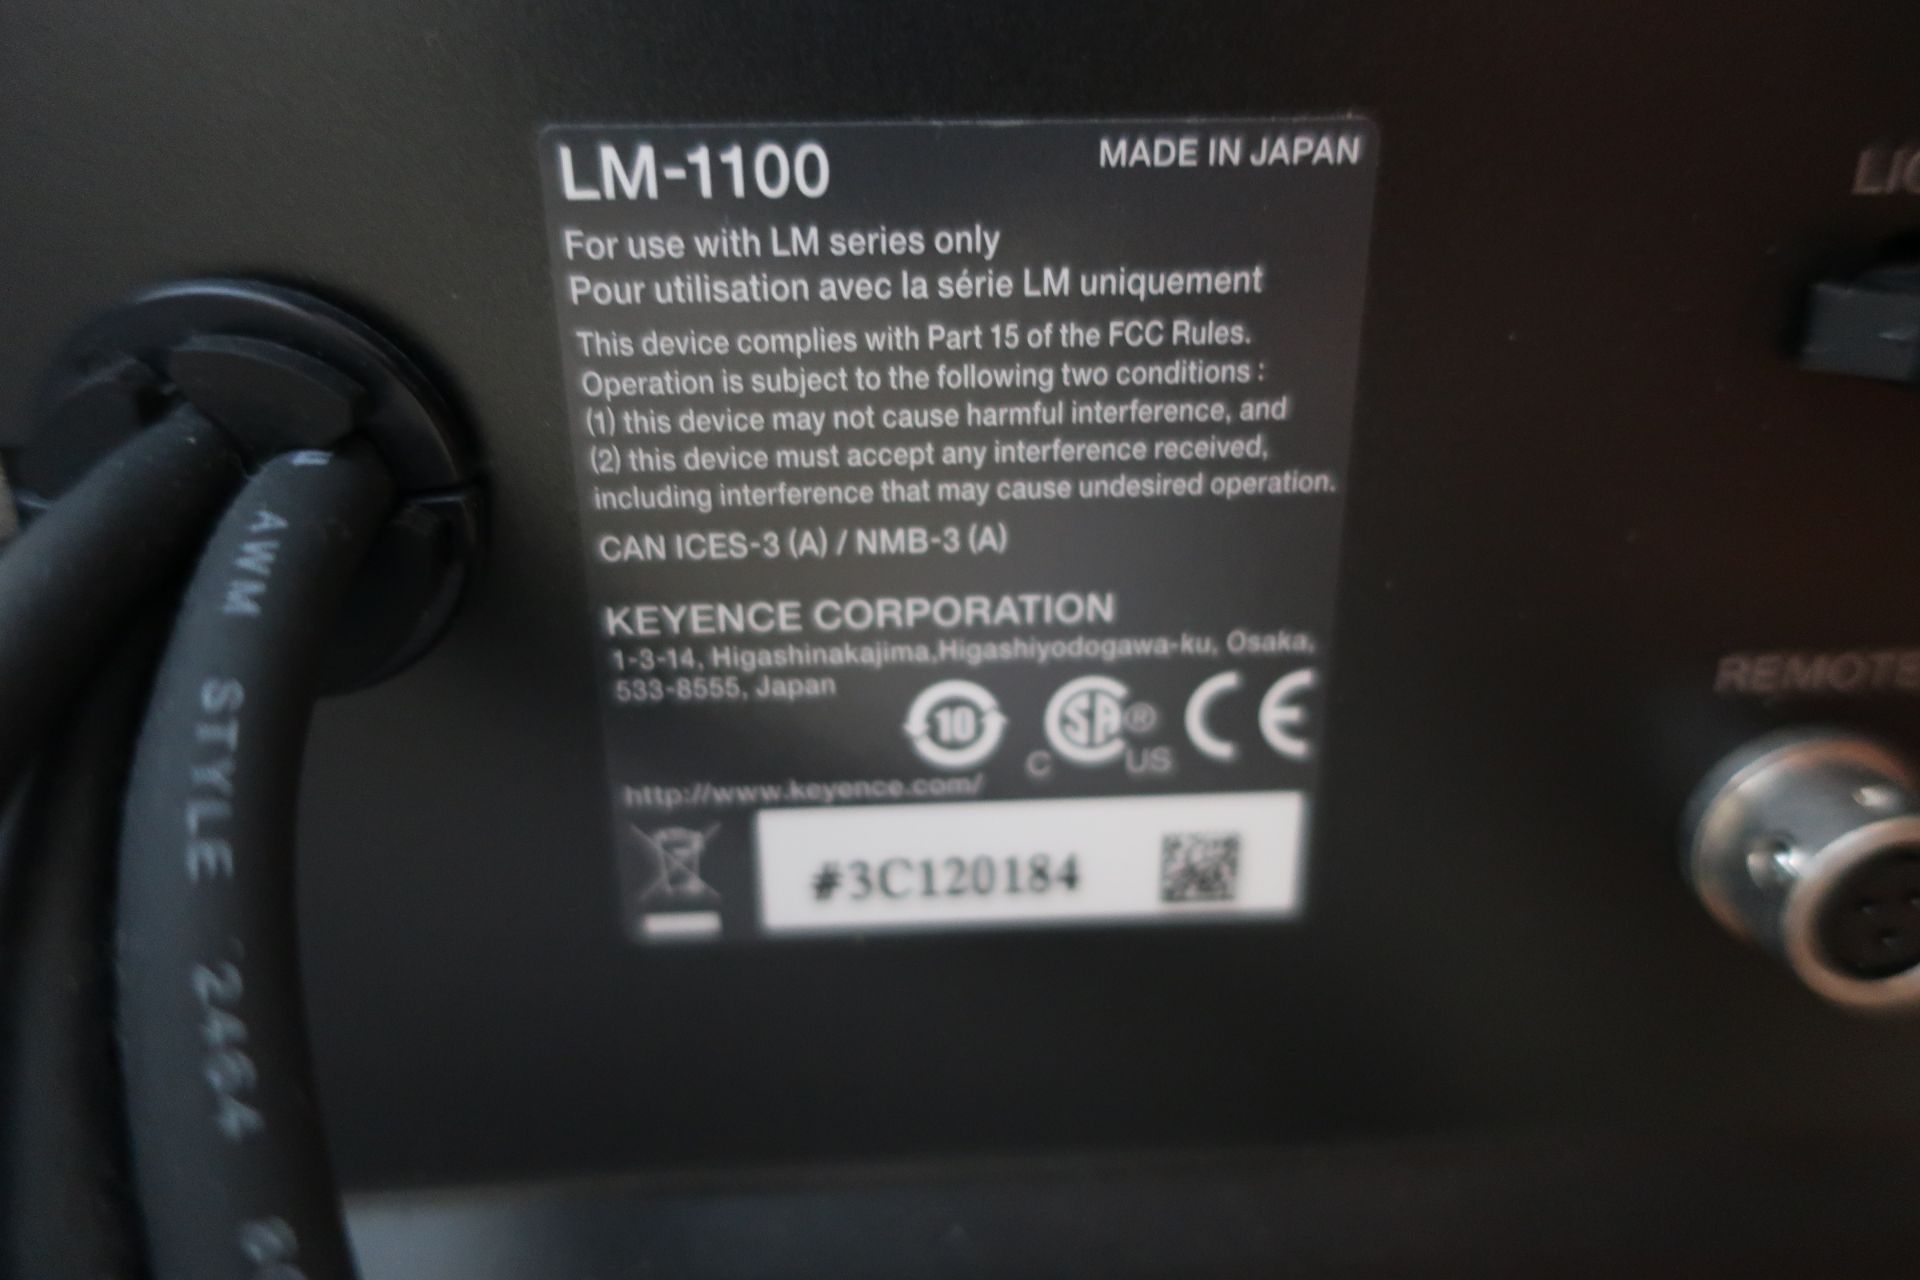 2021 Keyence LM-1100 High Precision Image Dimension Measurement System, SN 3C123184 - Image 11 of 20